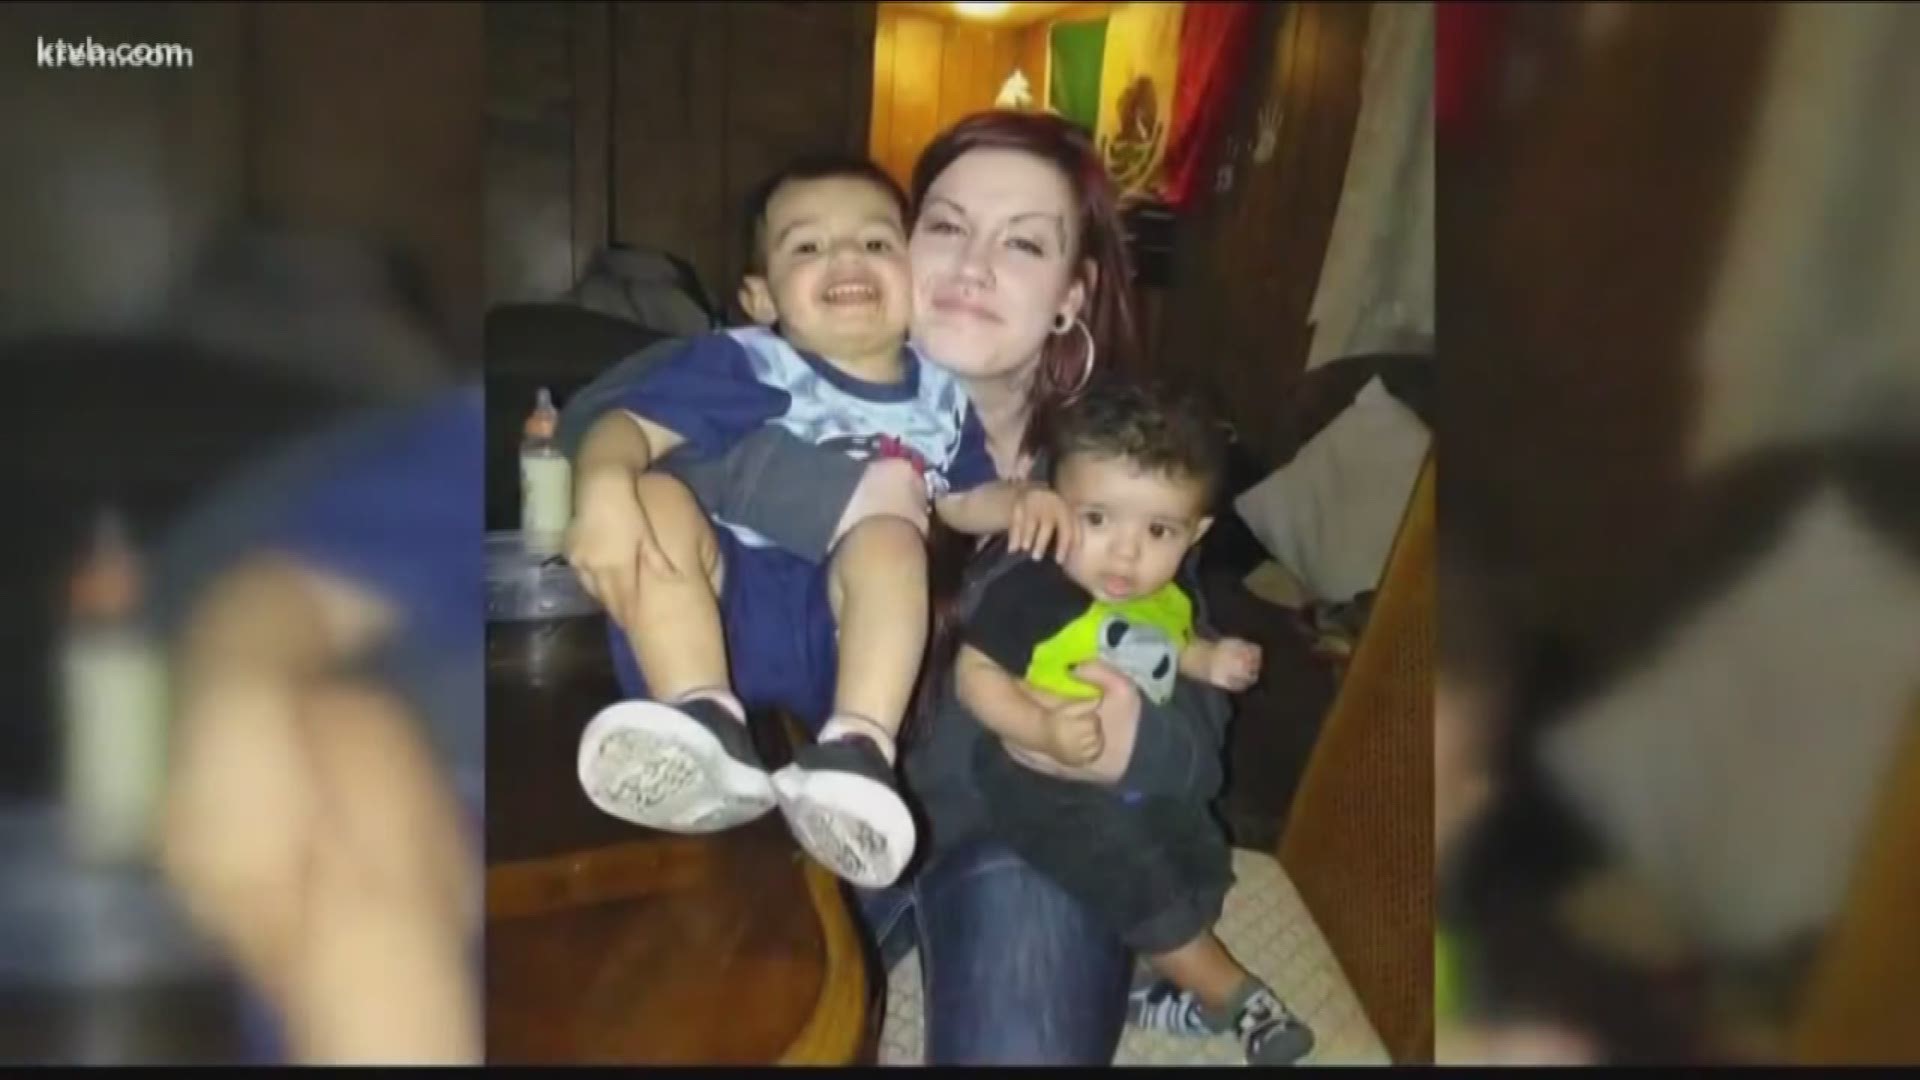 Shasta Groene and her sons were found safe Saturday evening, according to tweets by Nampa Police.